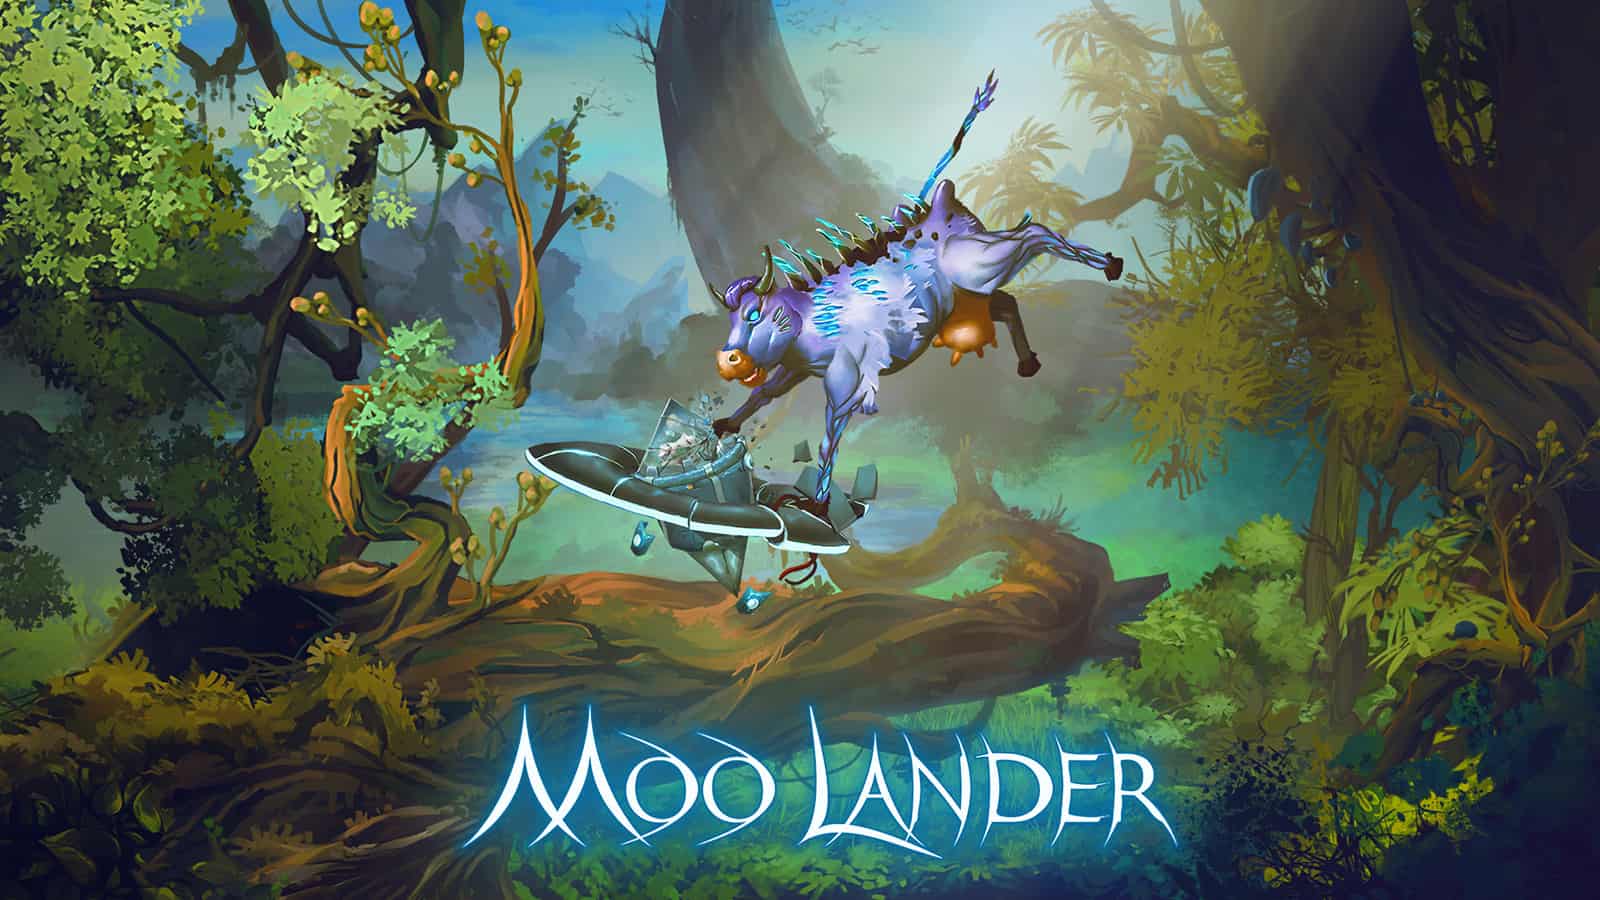 2D Platformer Moo Lander To Launch Next Month On PC And Consoles